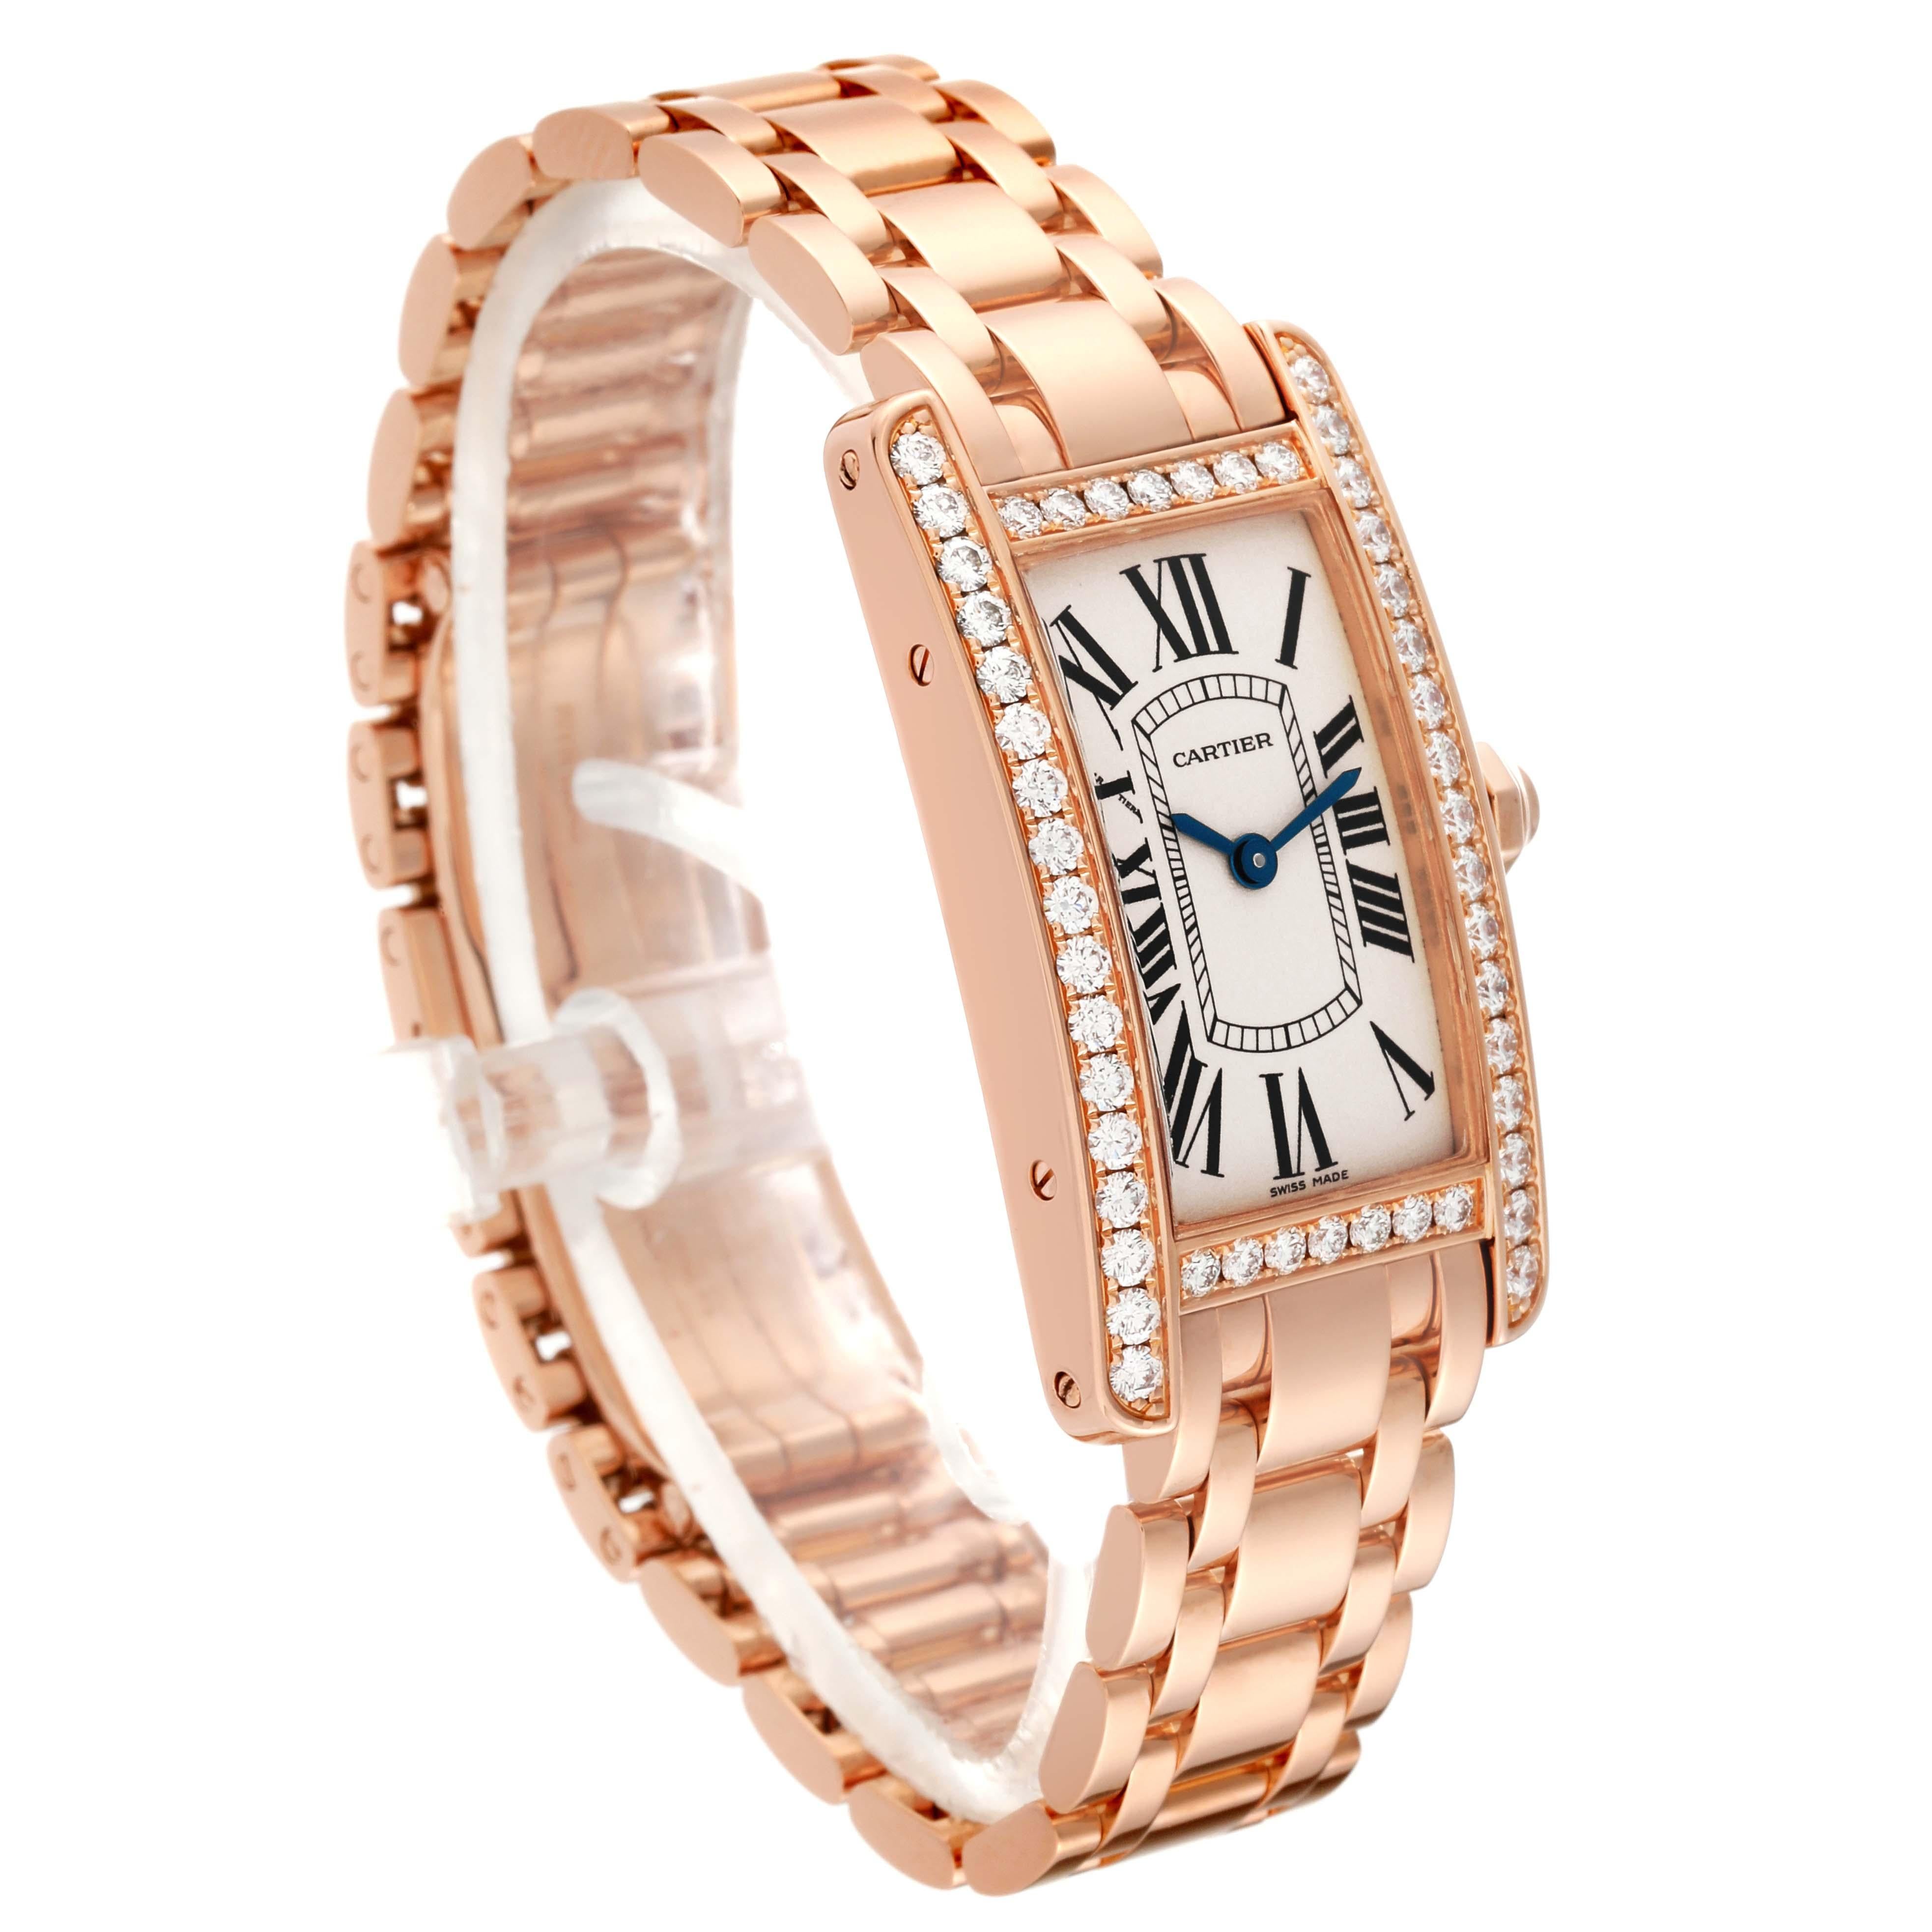 Cartier Tank Americaine Rose Gold Diamond Ladies Watch WB7079M5 Box Card For Sale 6